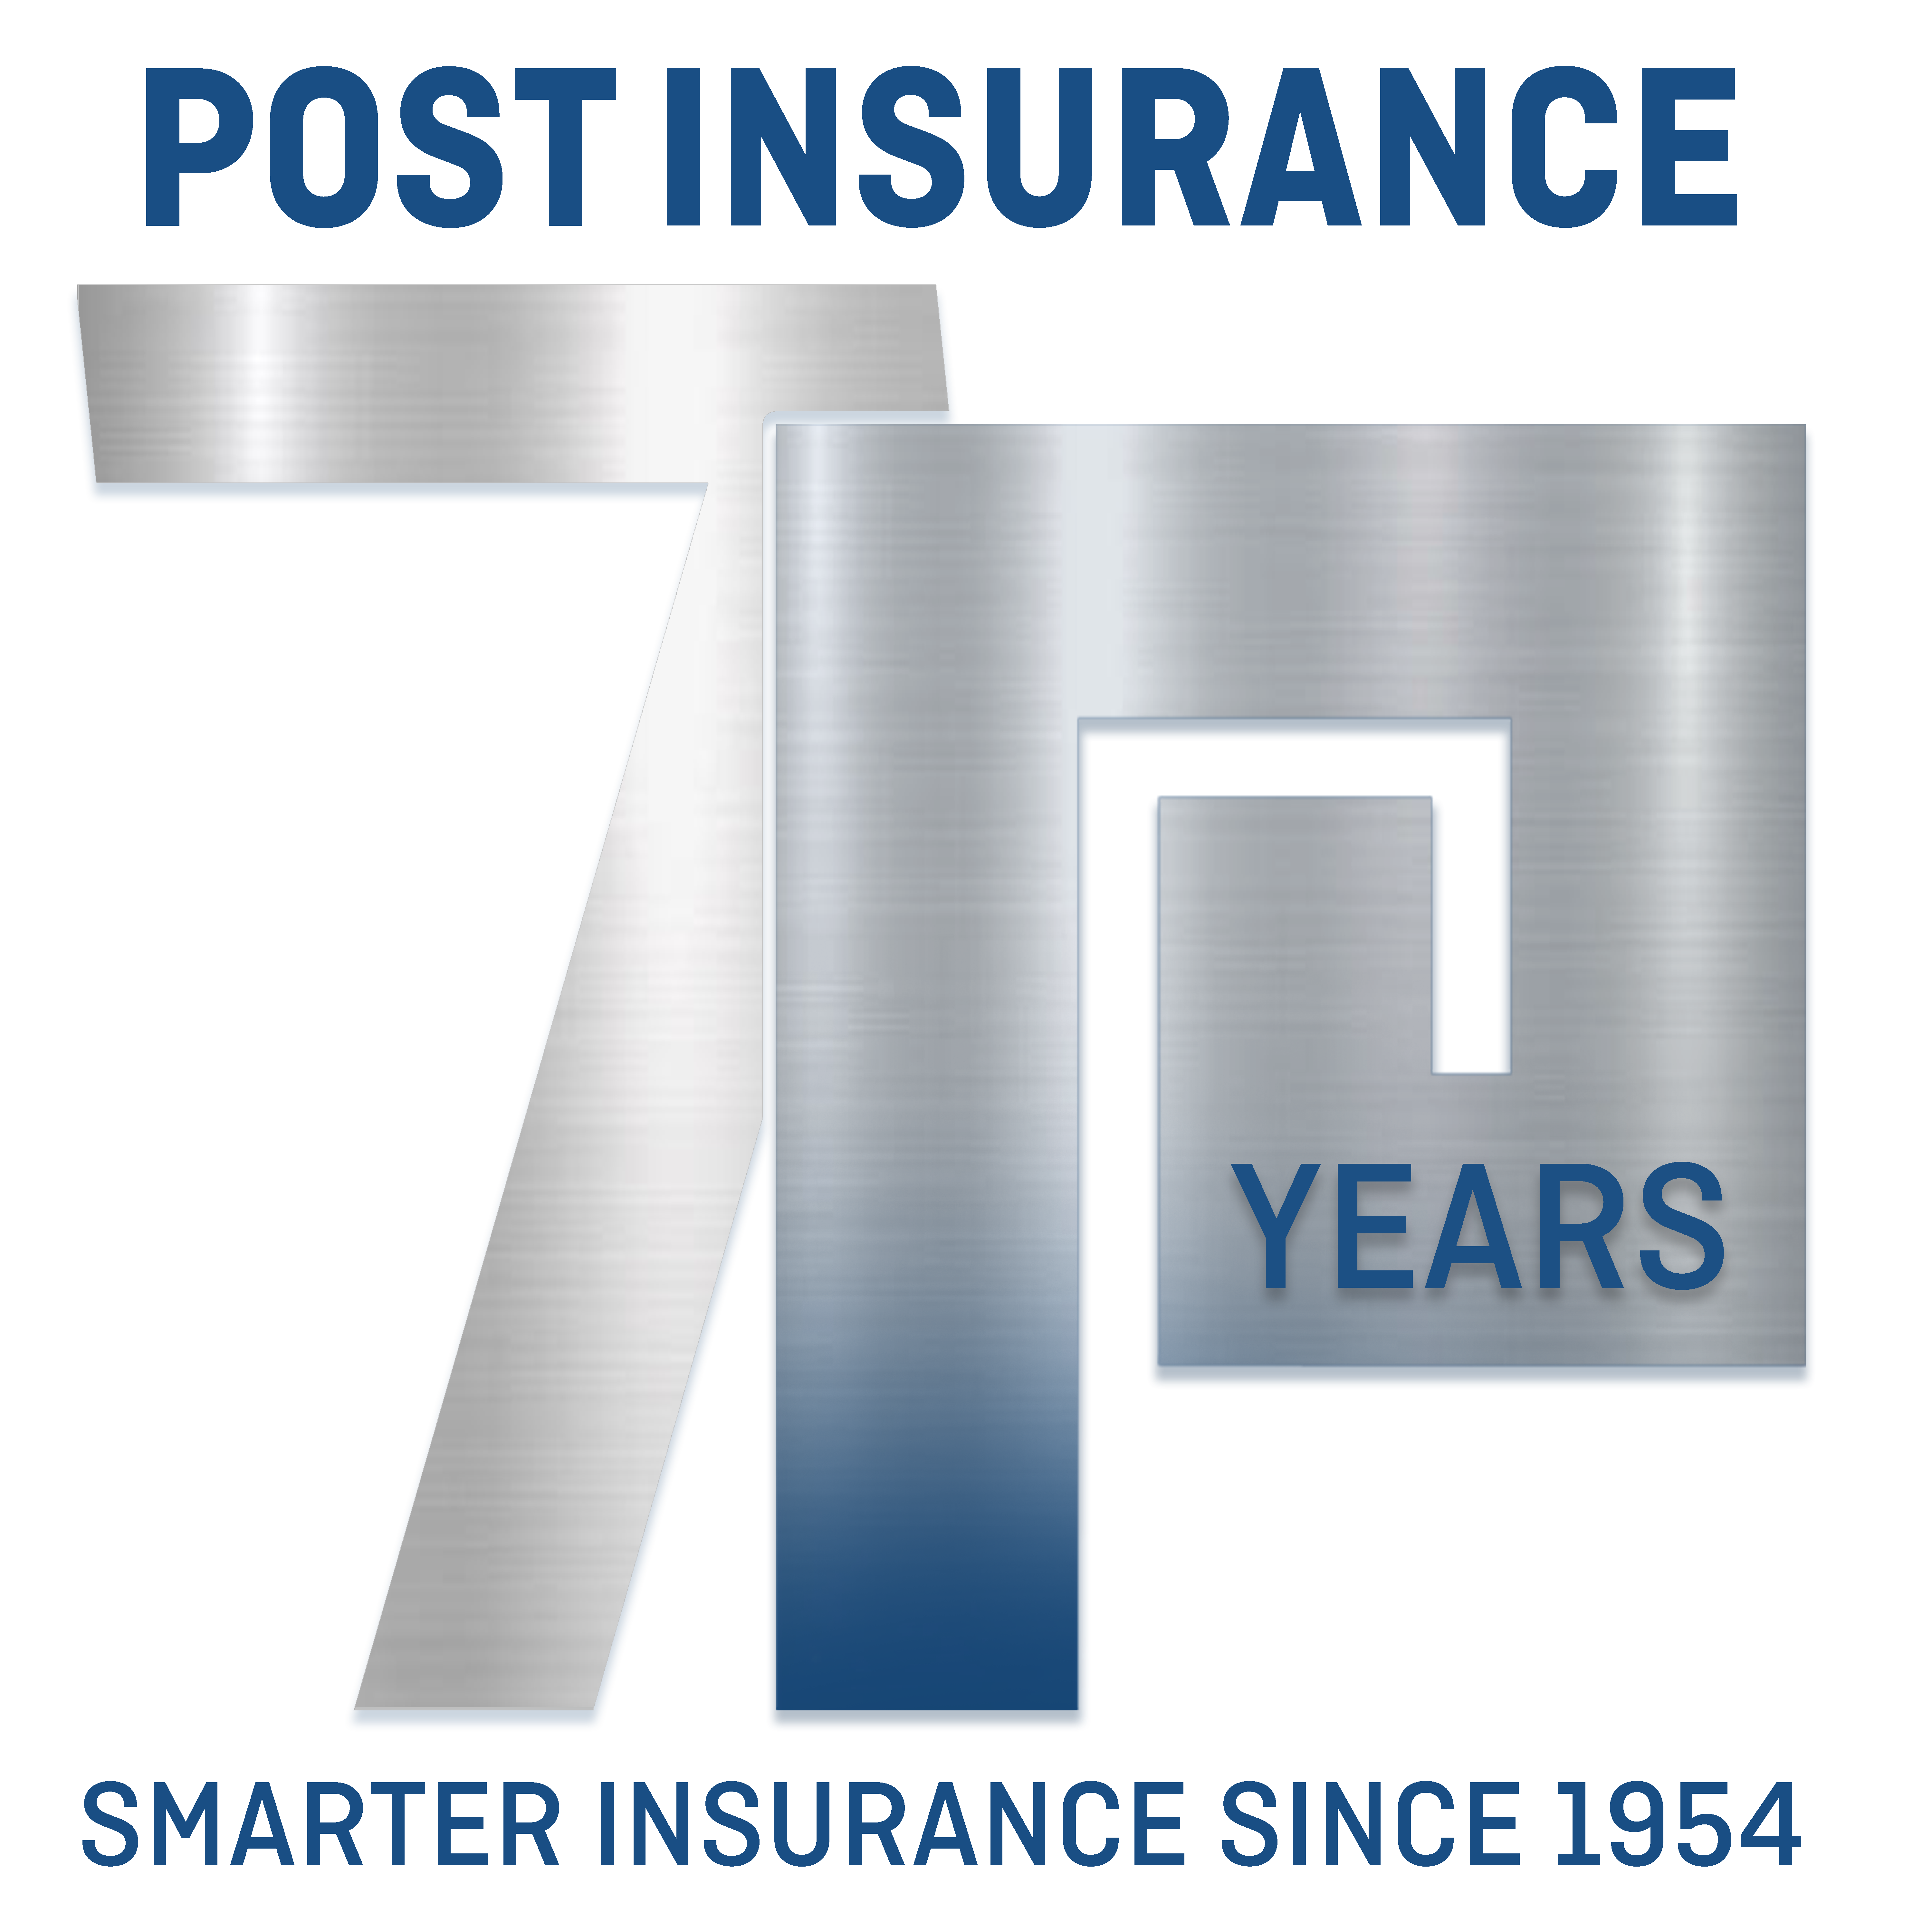 70 Years with Post Insurance